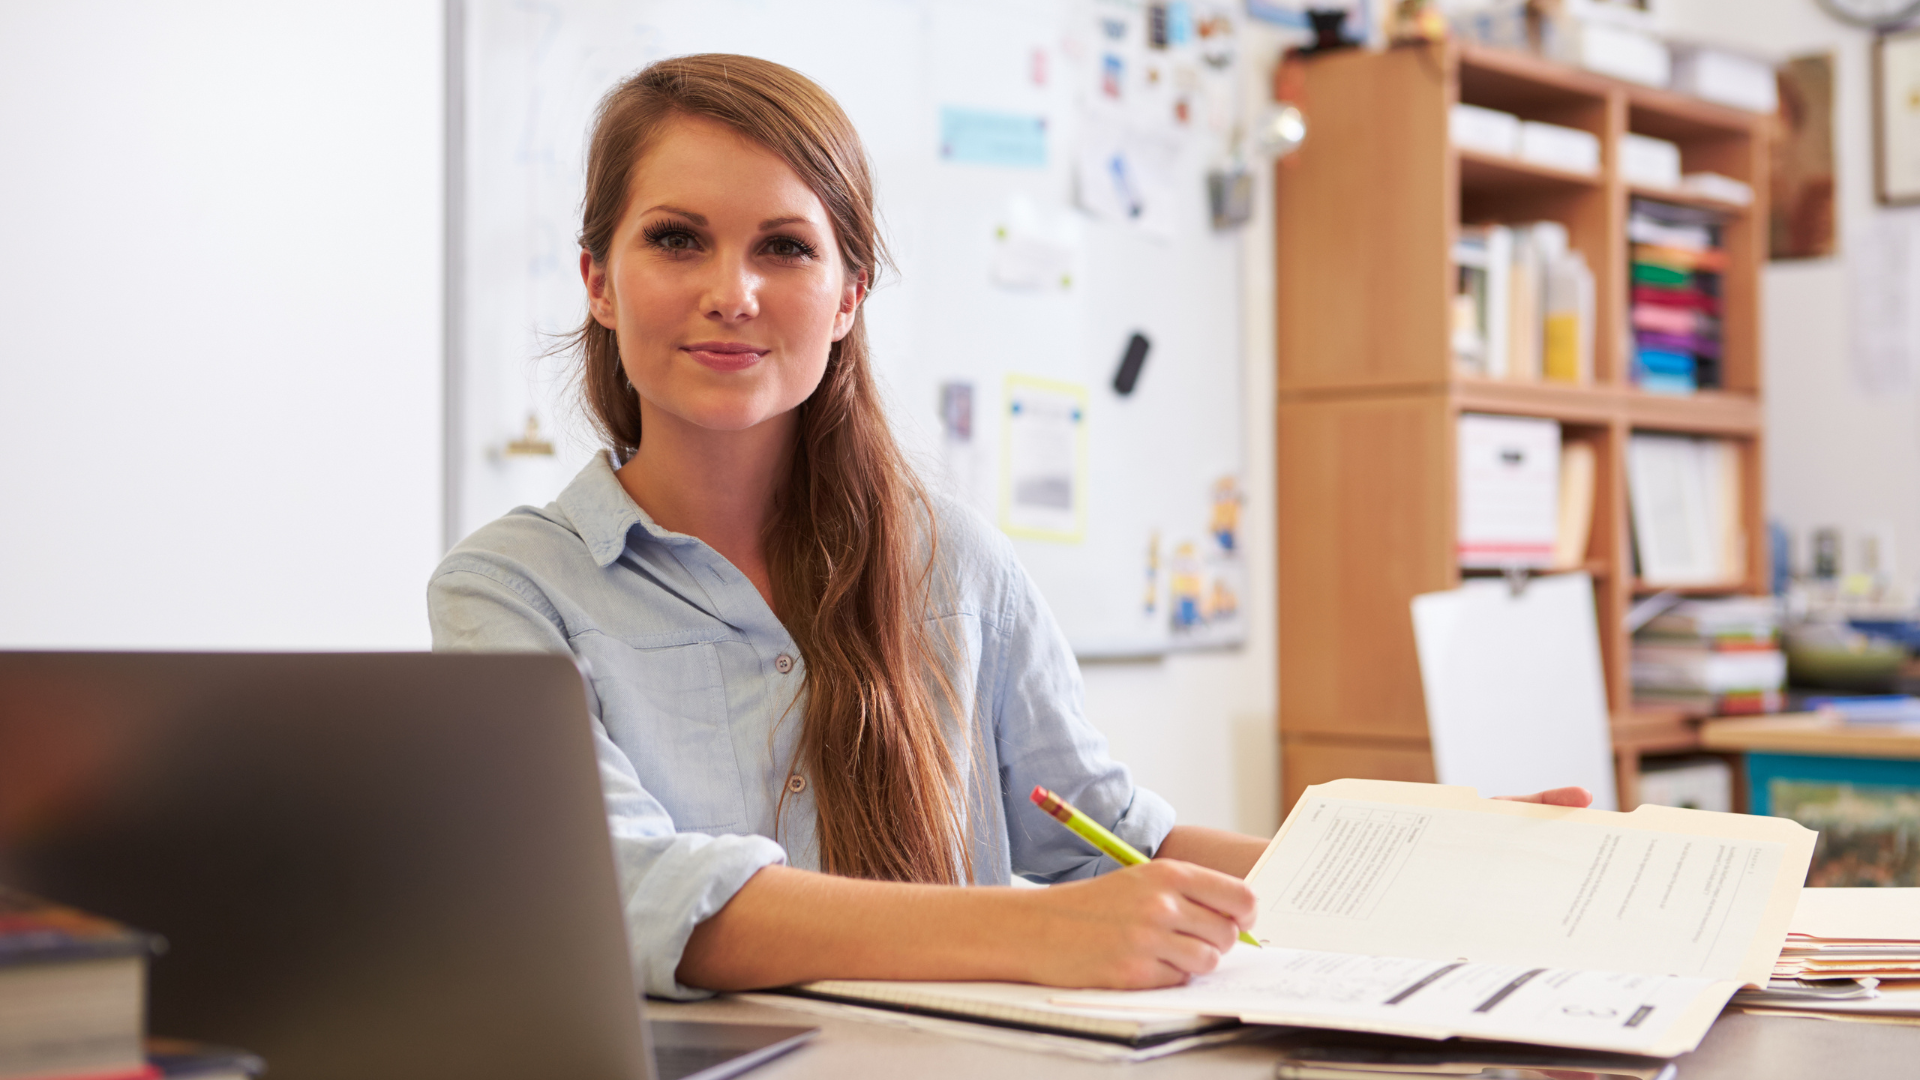 Educator sitting at desk with materials in front of her